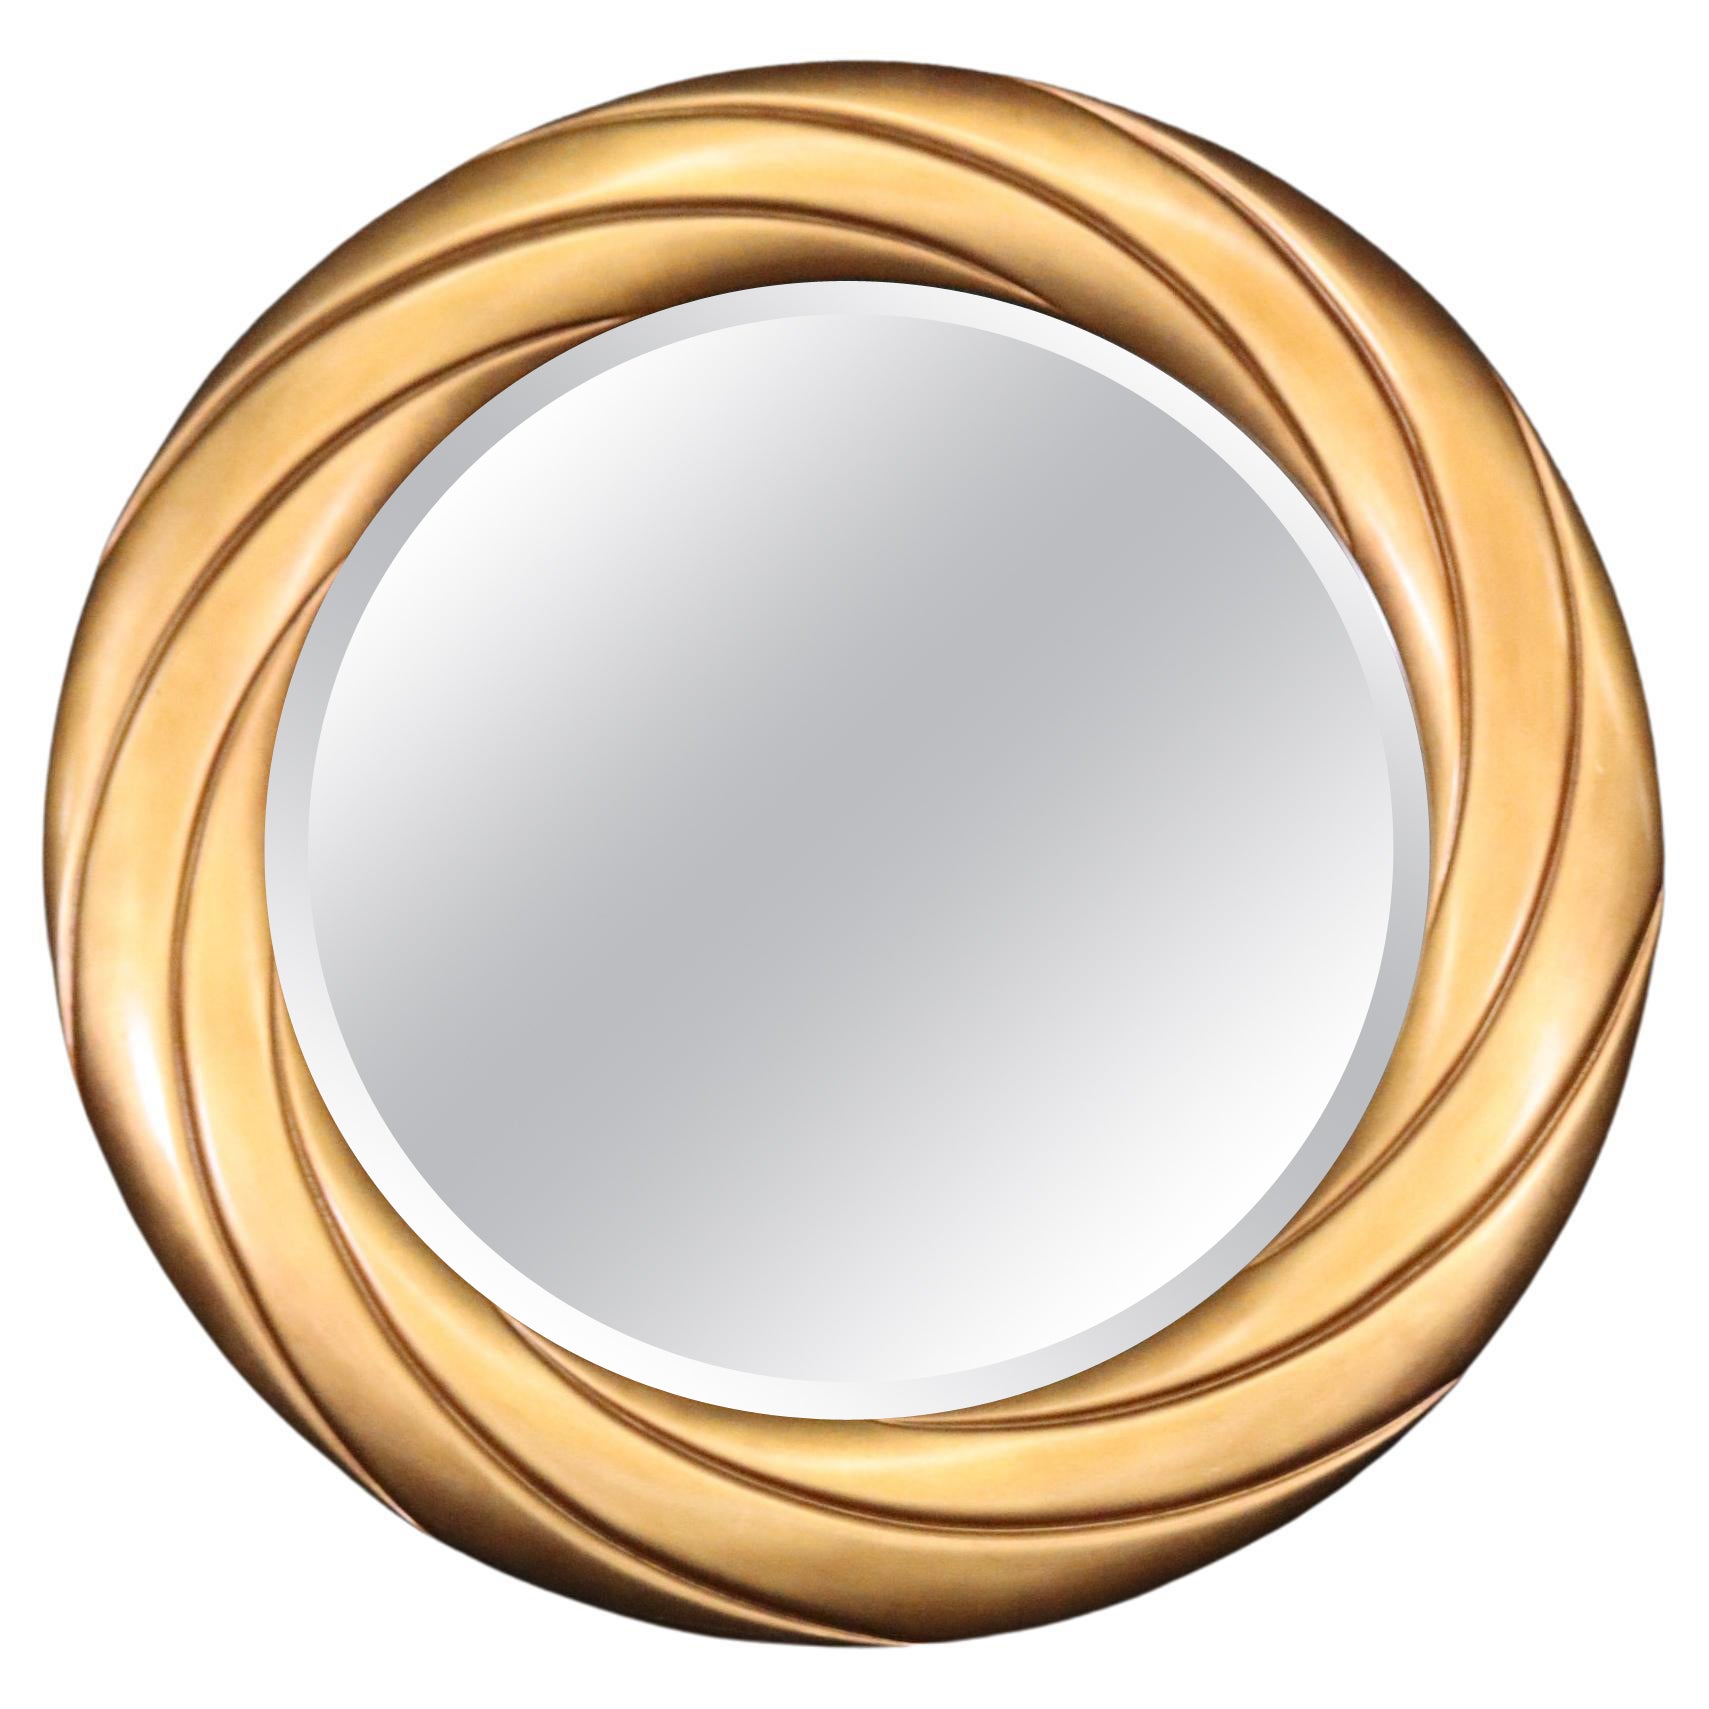 Unique Large Beveled Circular Wall Mirror in Gold For Sale